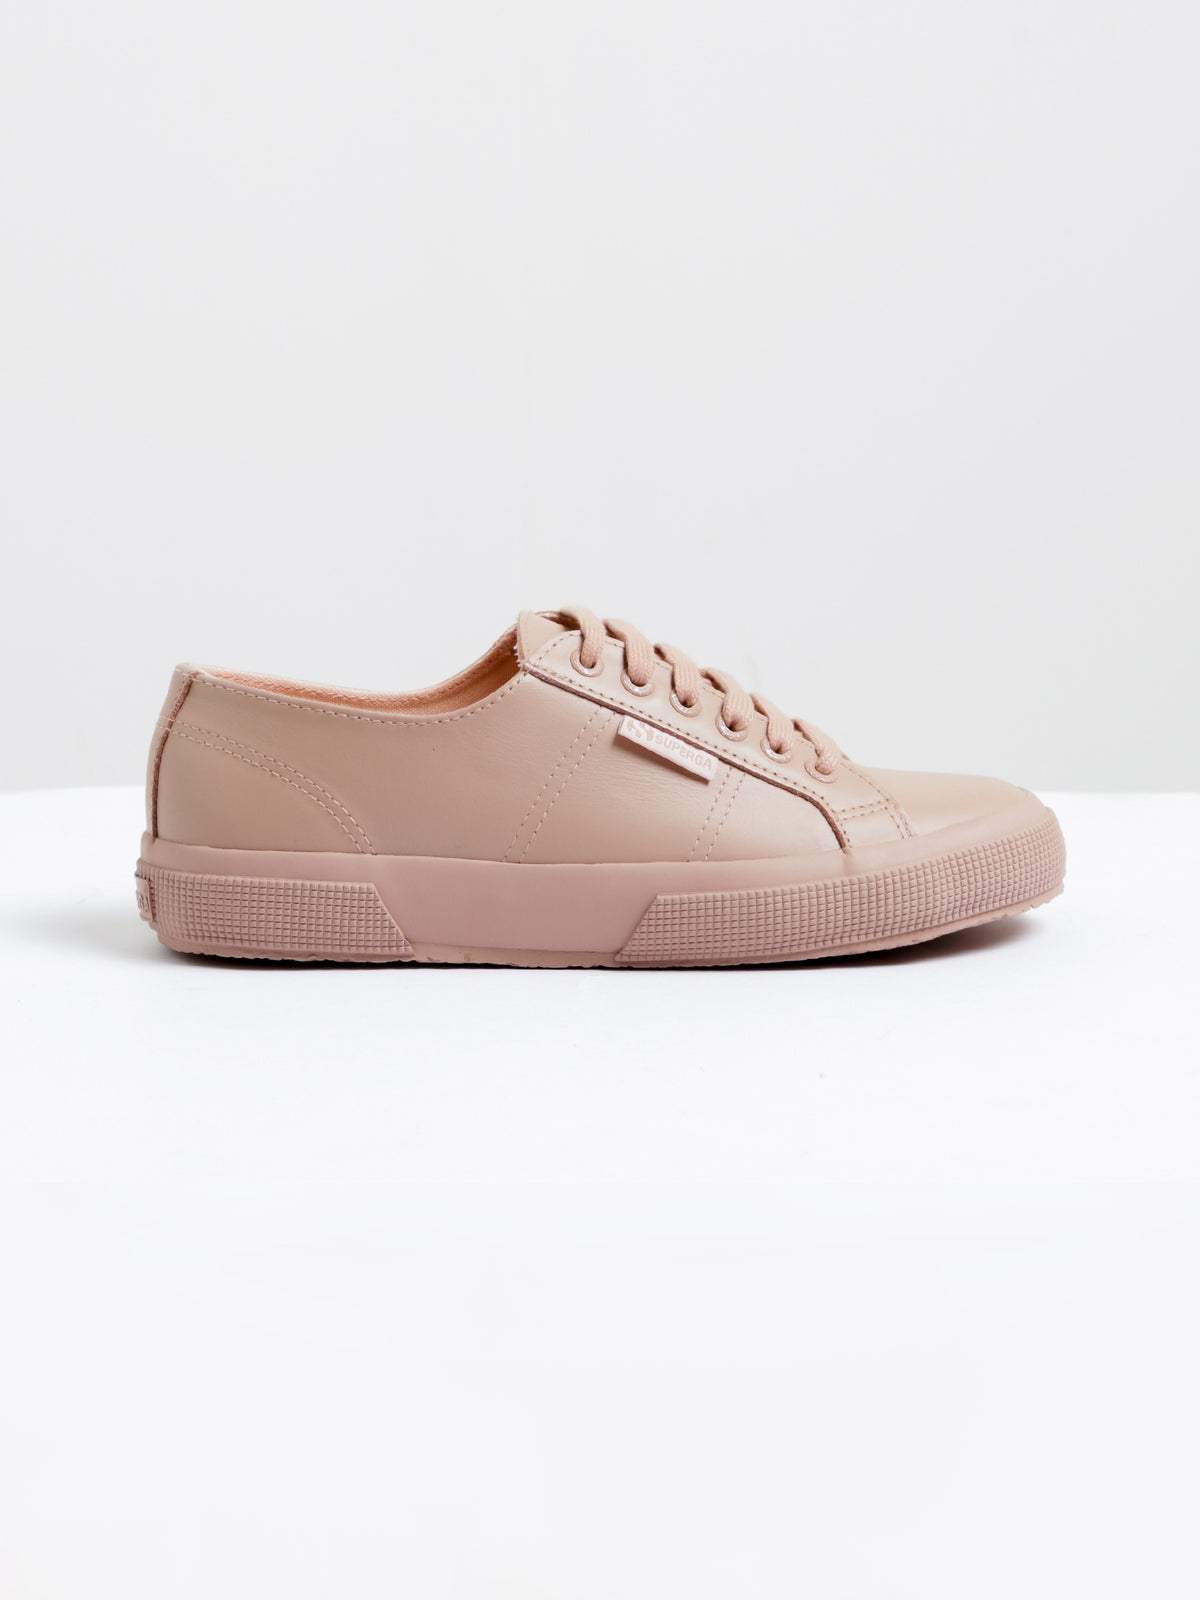 Womens 2750 FGLU Sneakers in Pink Leather